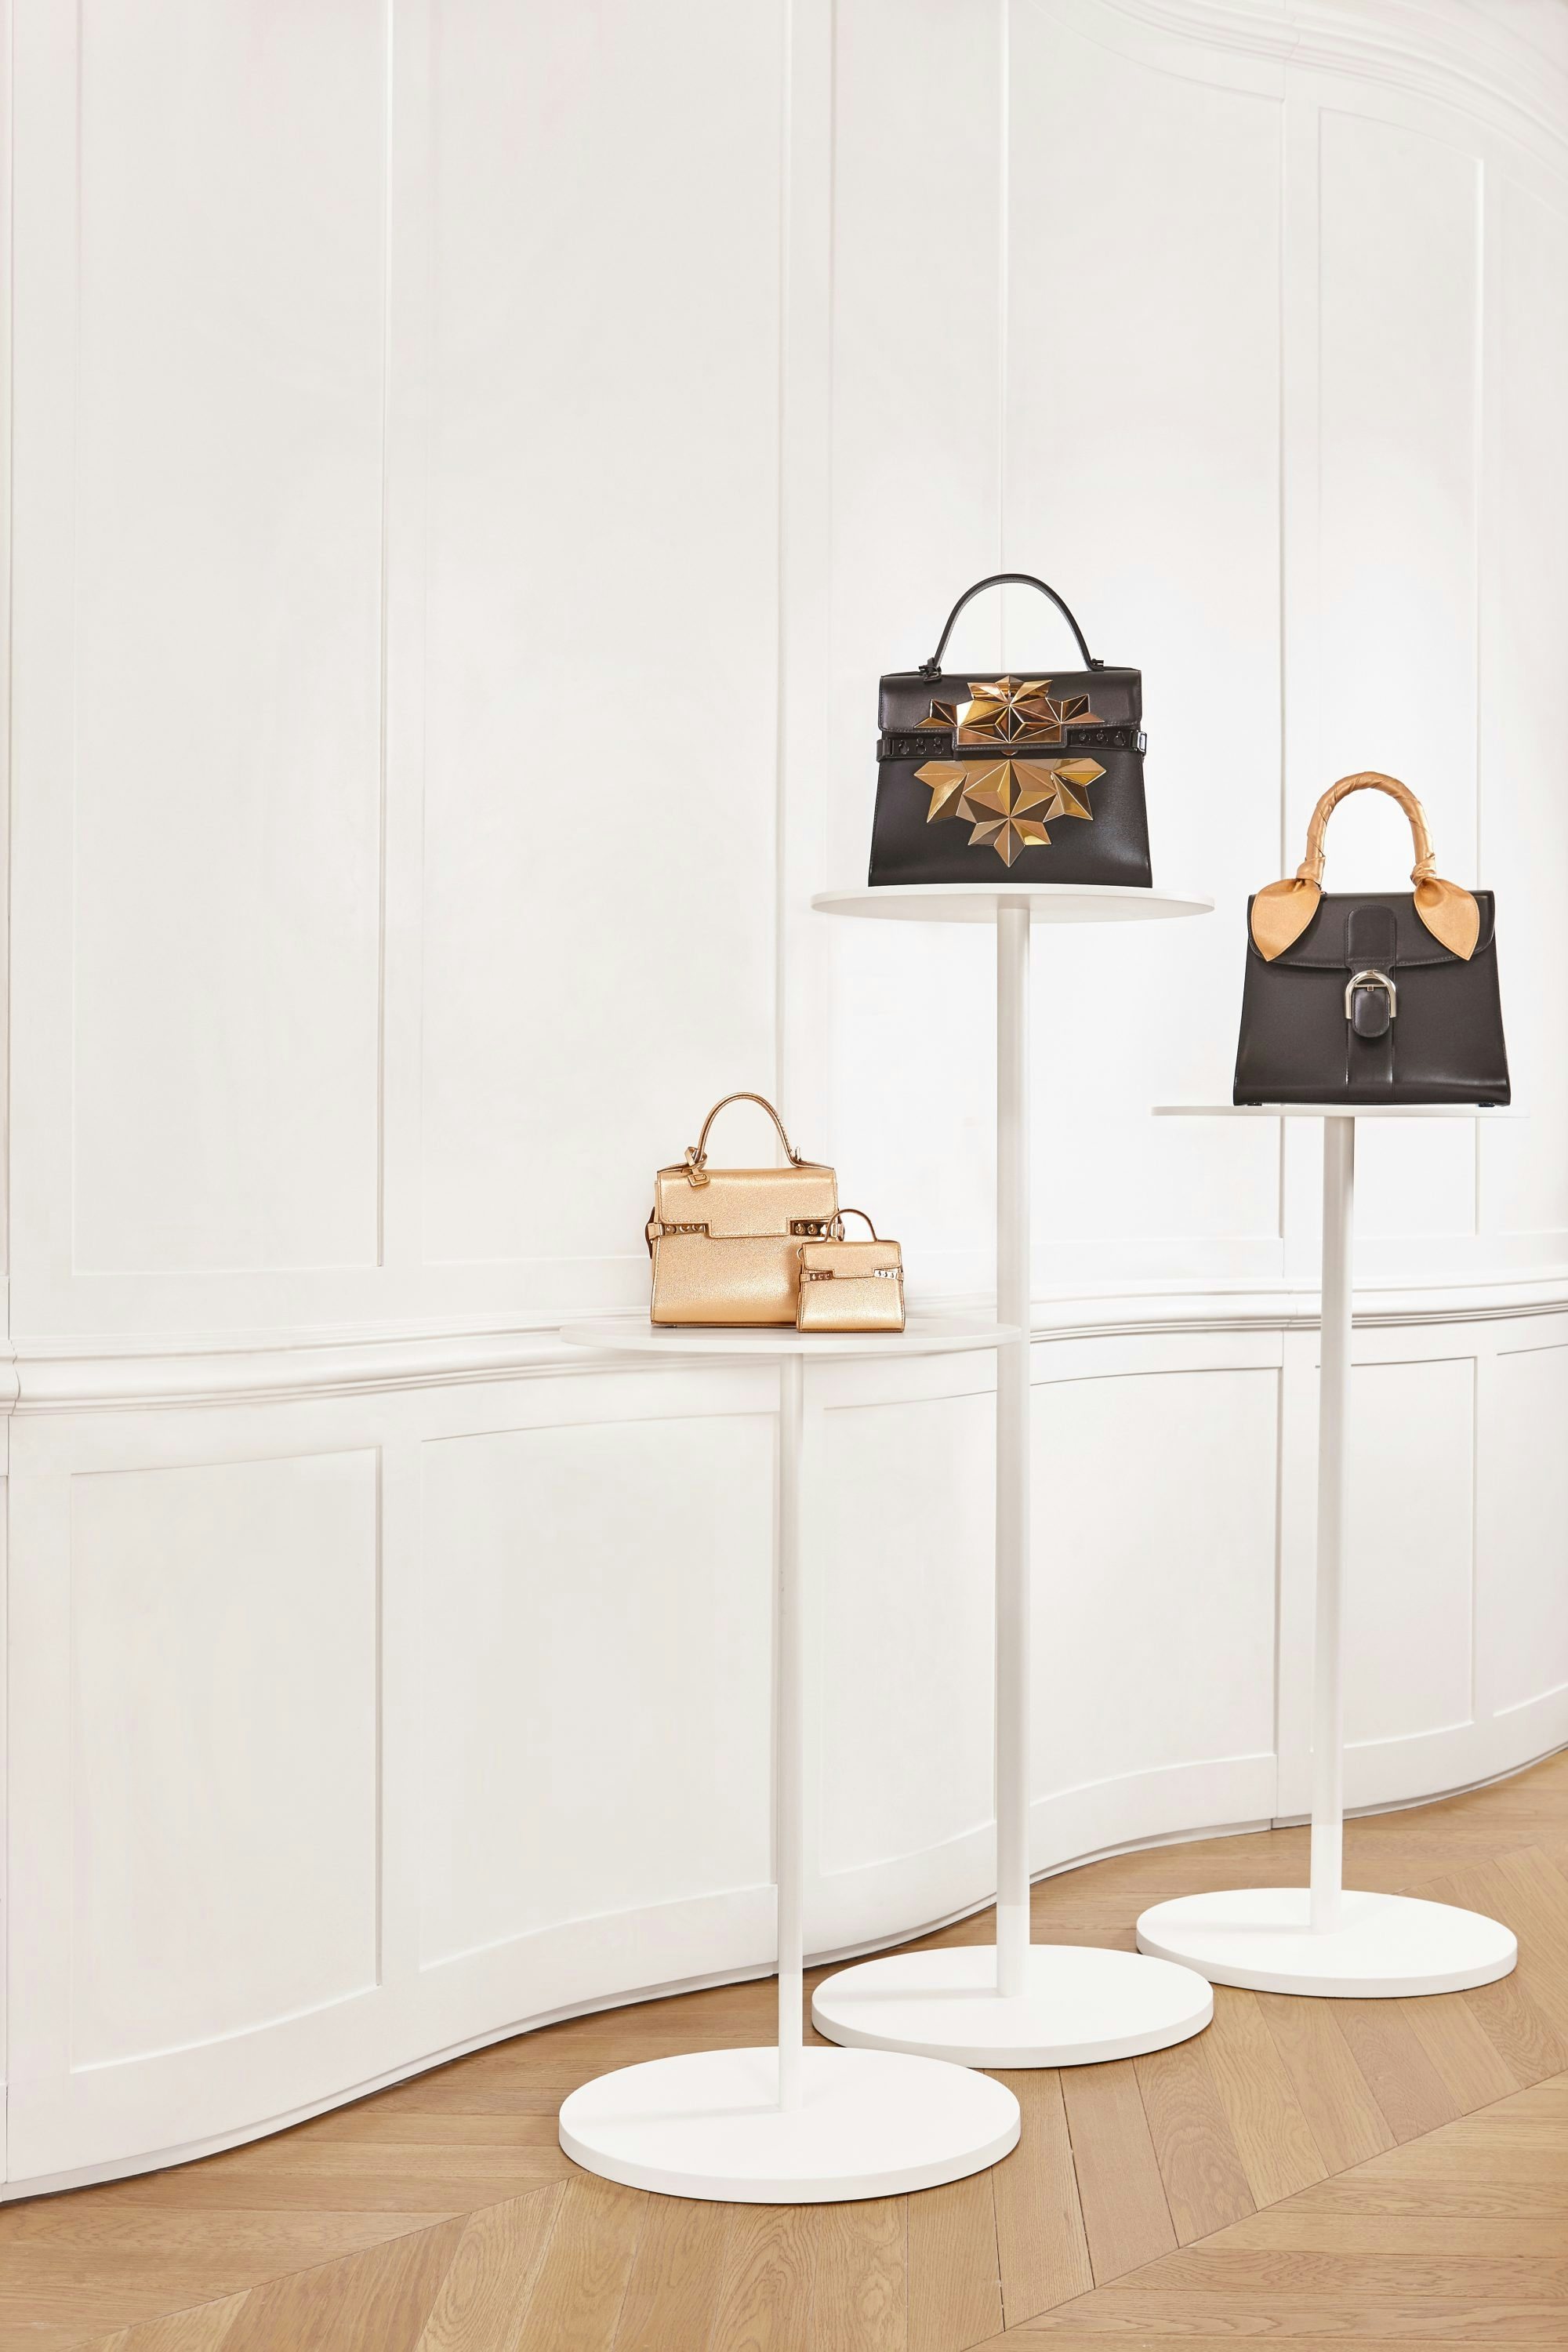 The gold starburst is a feature in Delvaux's end-of-year Poussière d’étoiles collection. (Courtesy Photo)